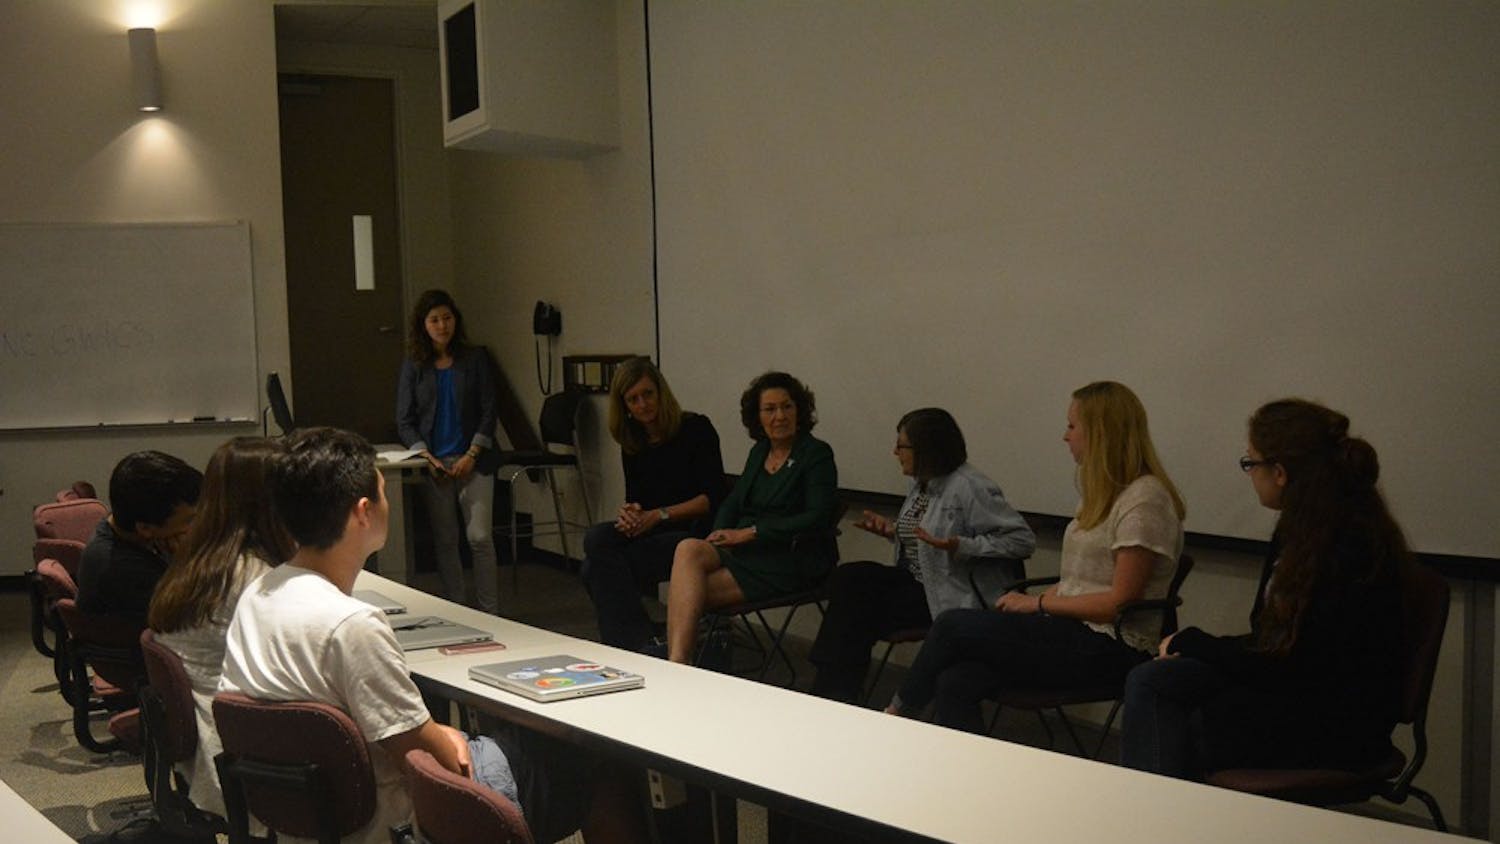 The Department of Computer Science holds a Women in Tech Discussion Panel as part of the Women in Tech Week on Wednesday night 